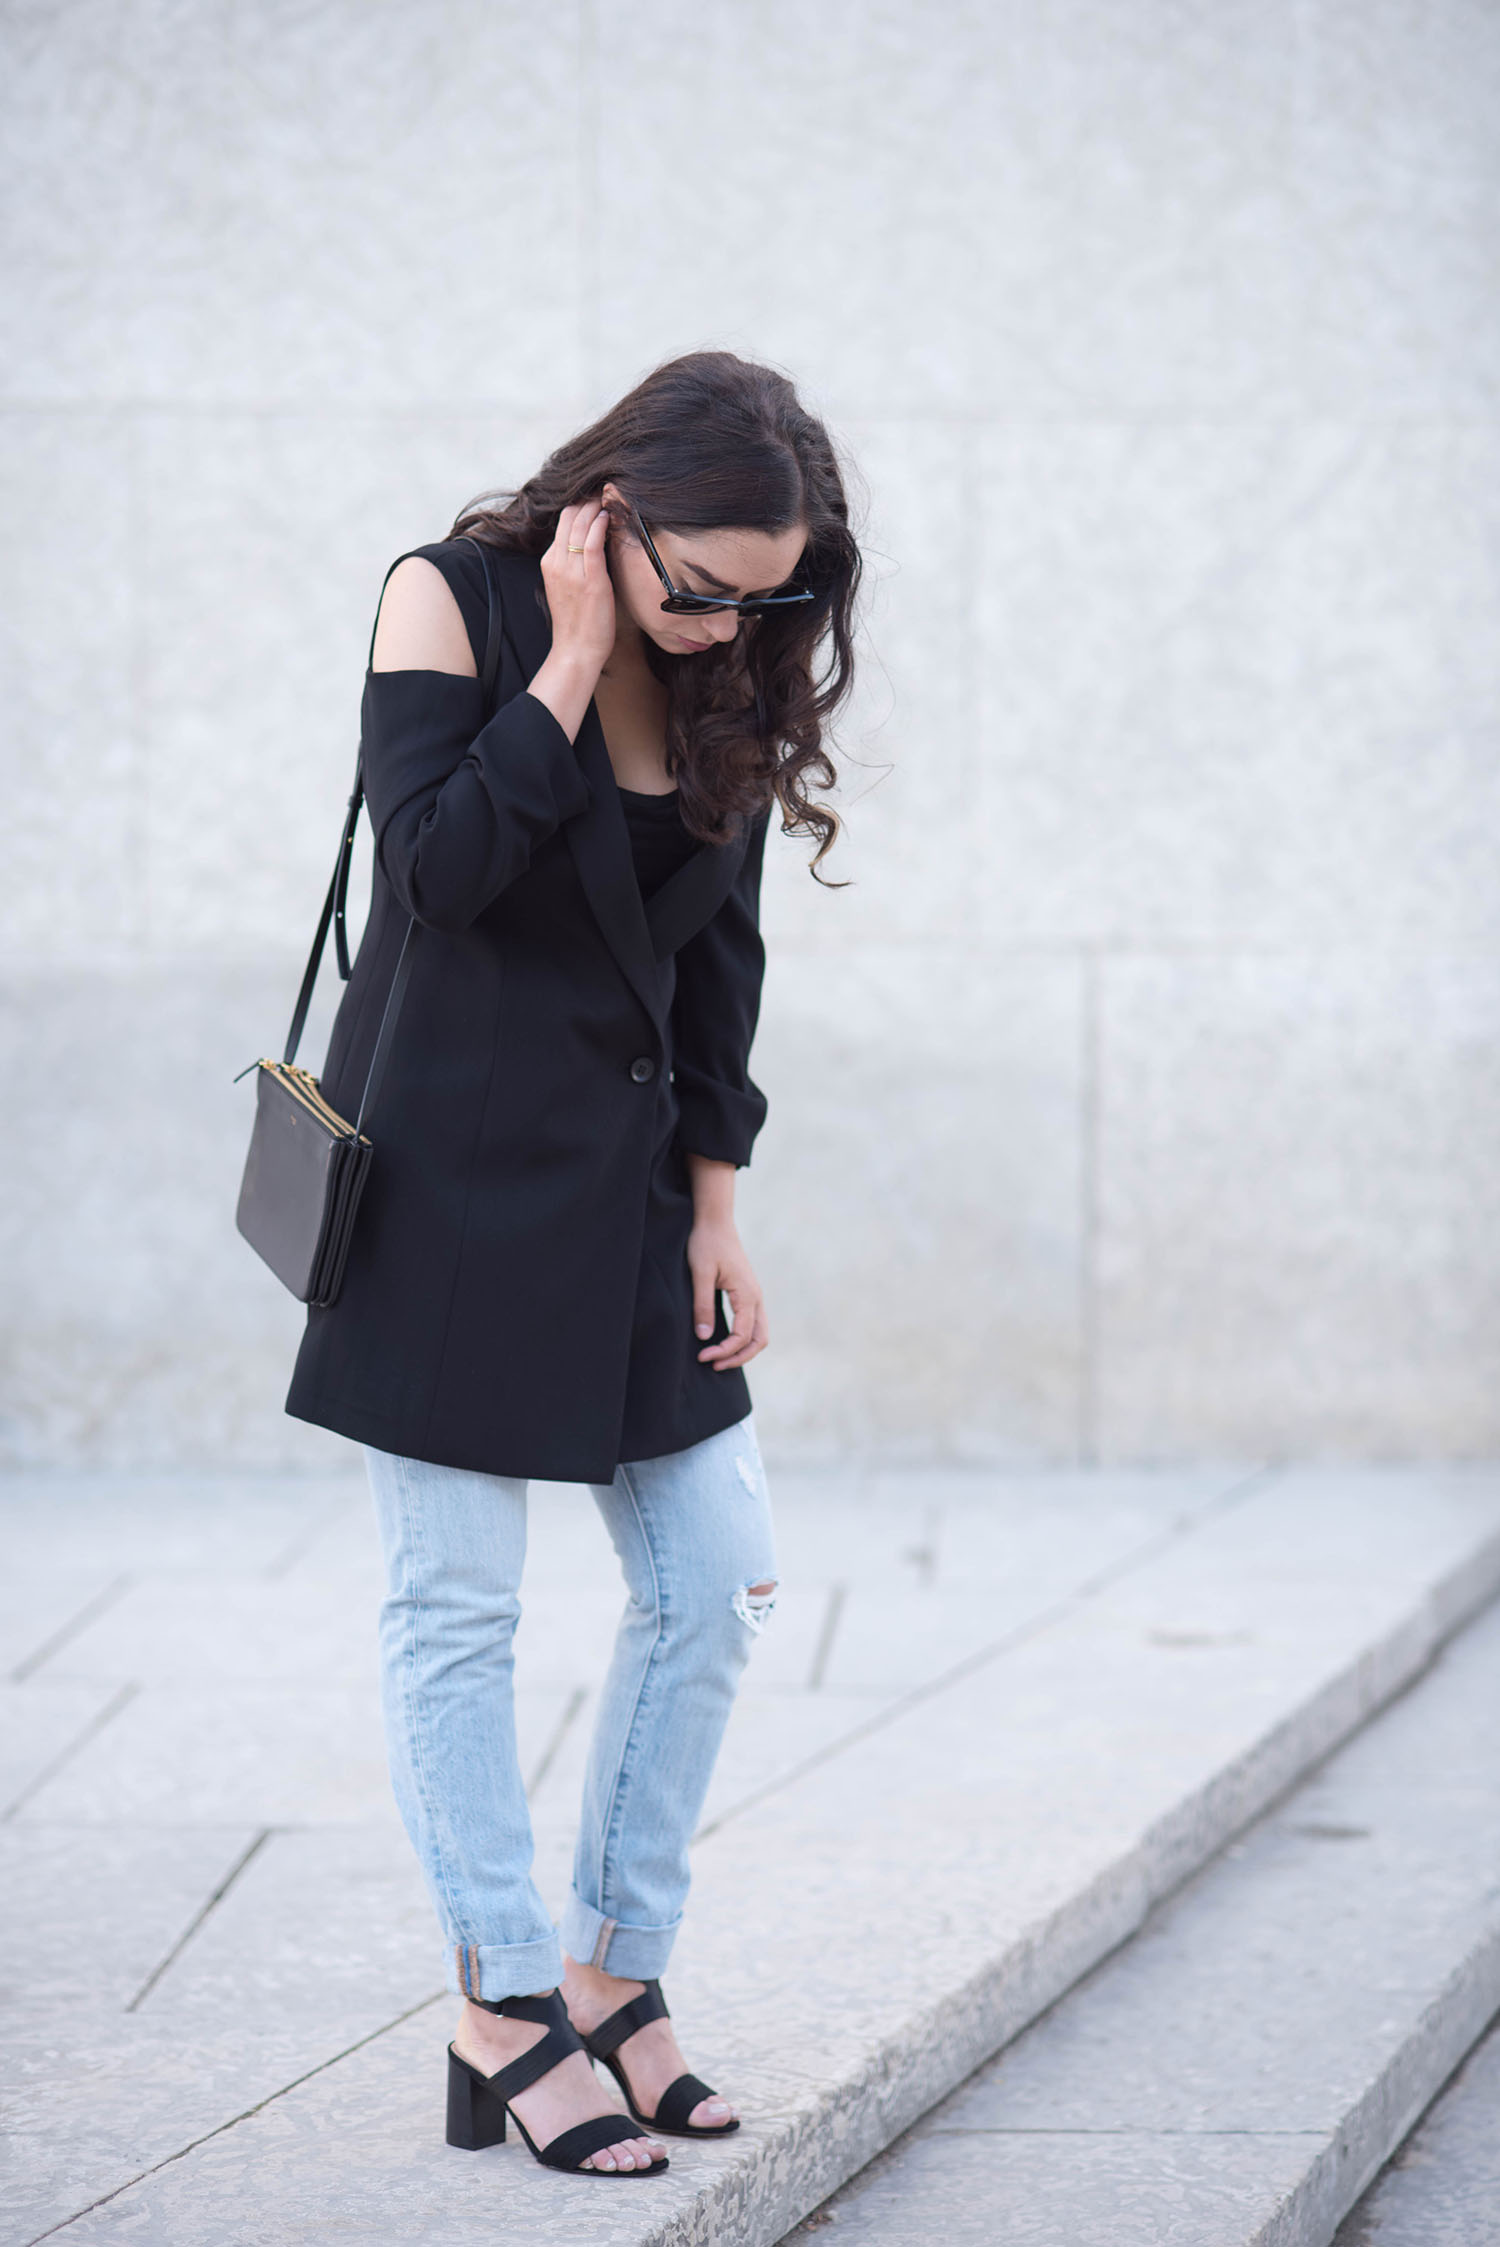 Style blogger Cee Fardoe of Coco & Vera stands wearing Levis 501 skinny jeans and an Ever New coat